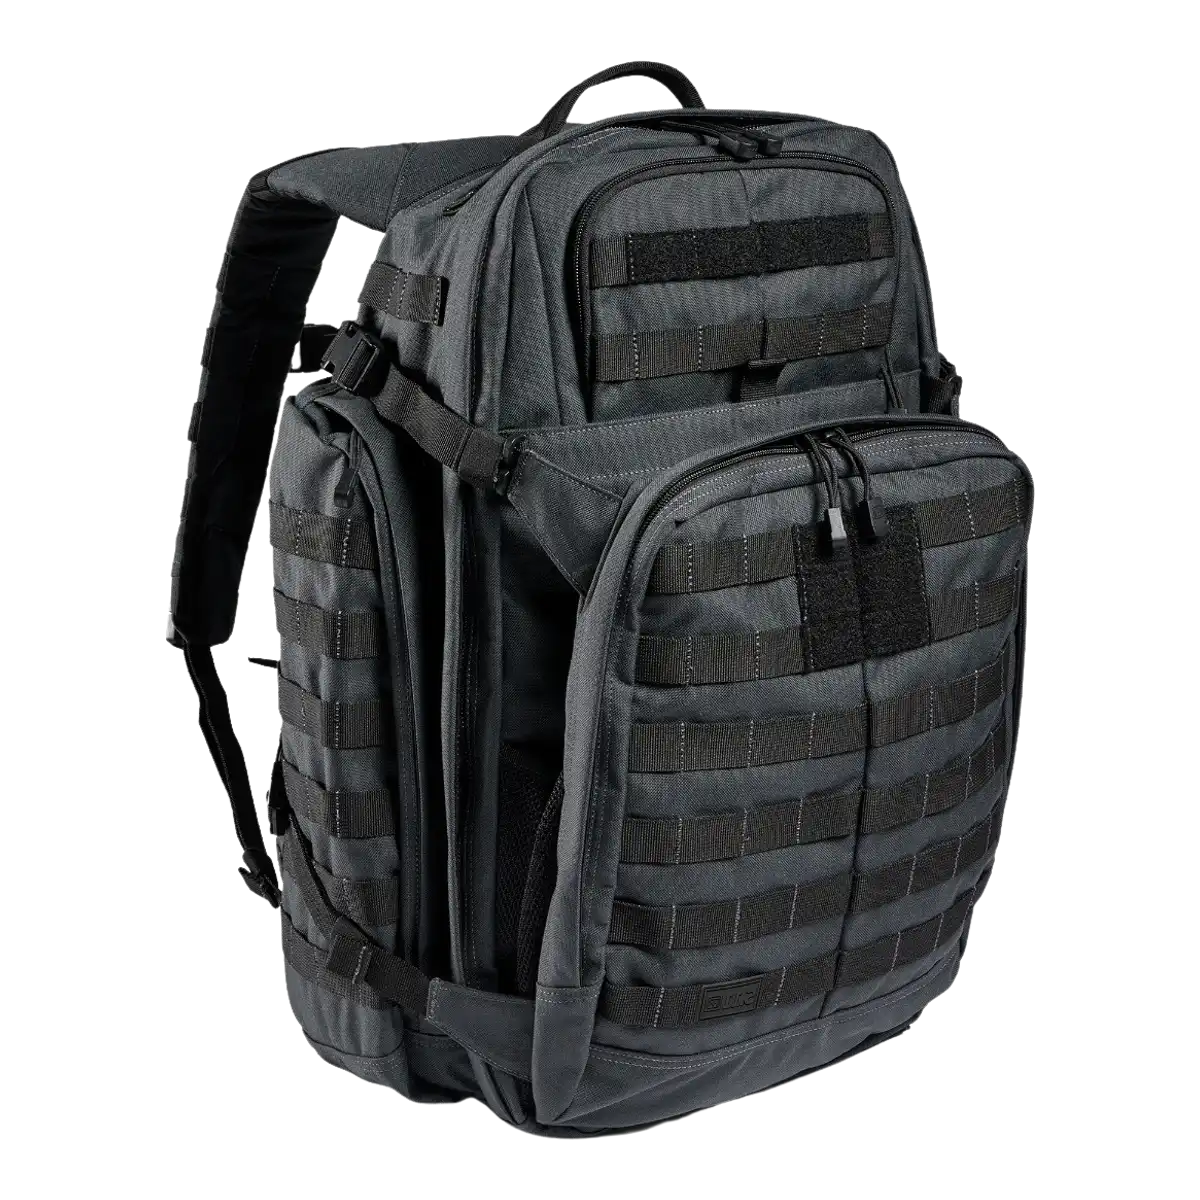 A prominent photograph of a tactical backpack—the model 'Rush 72' by the company 5.11 in the black and grey color